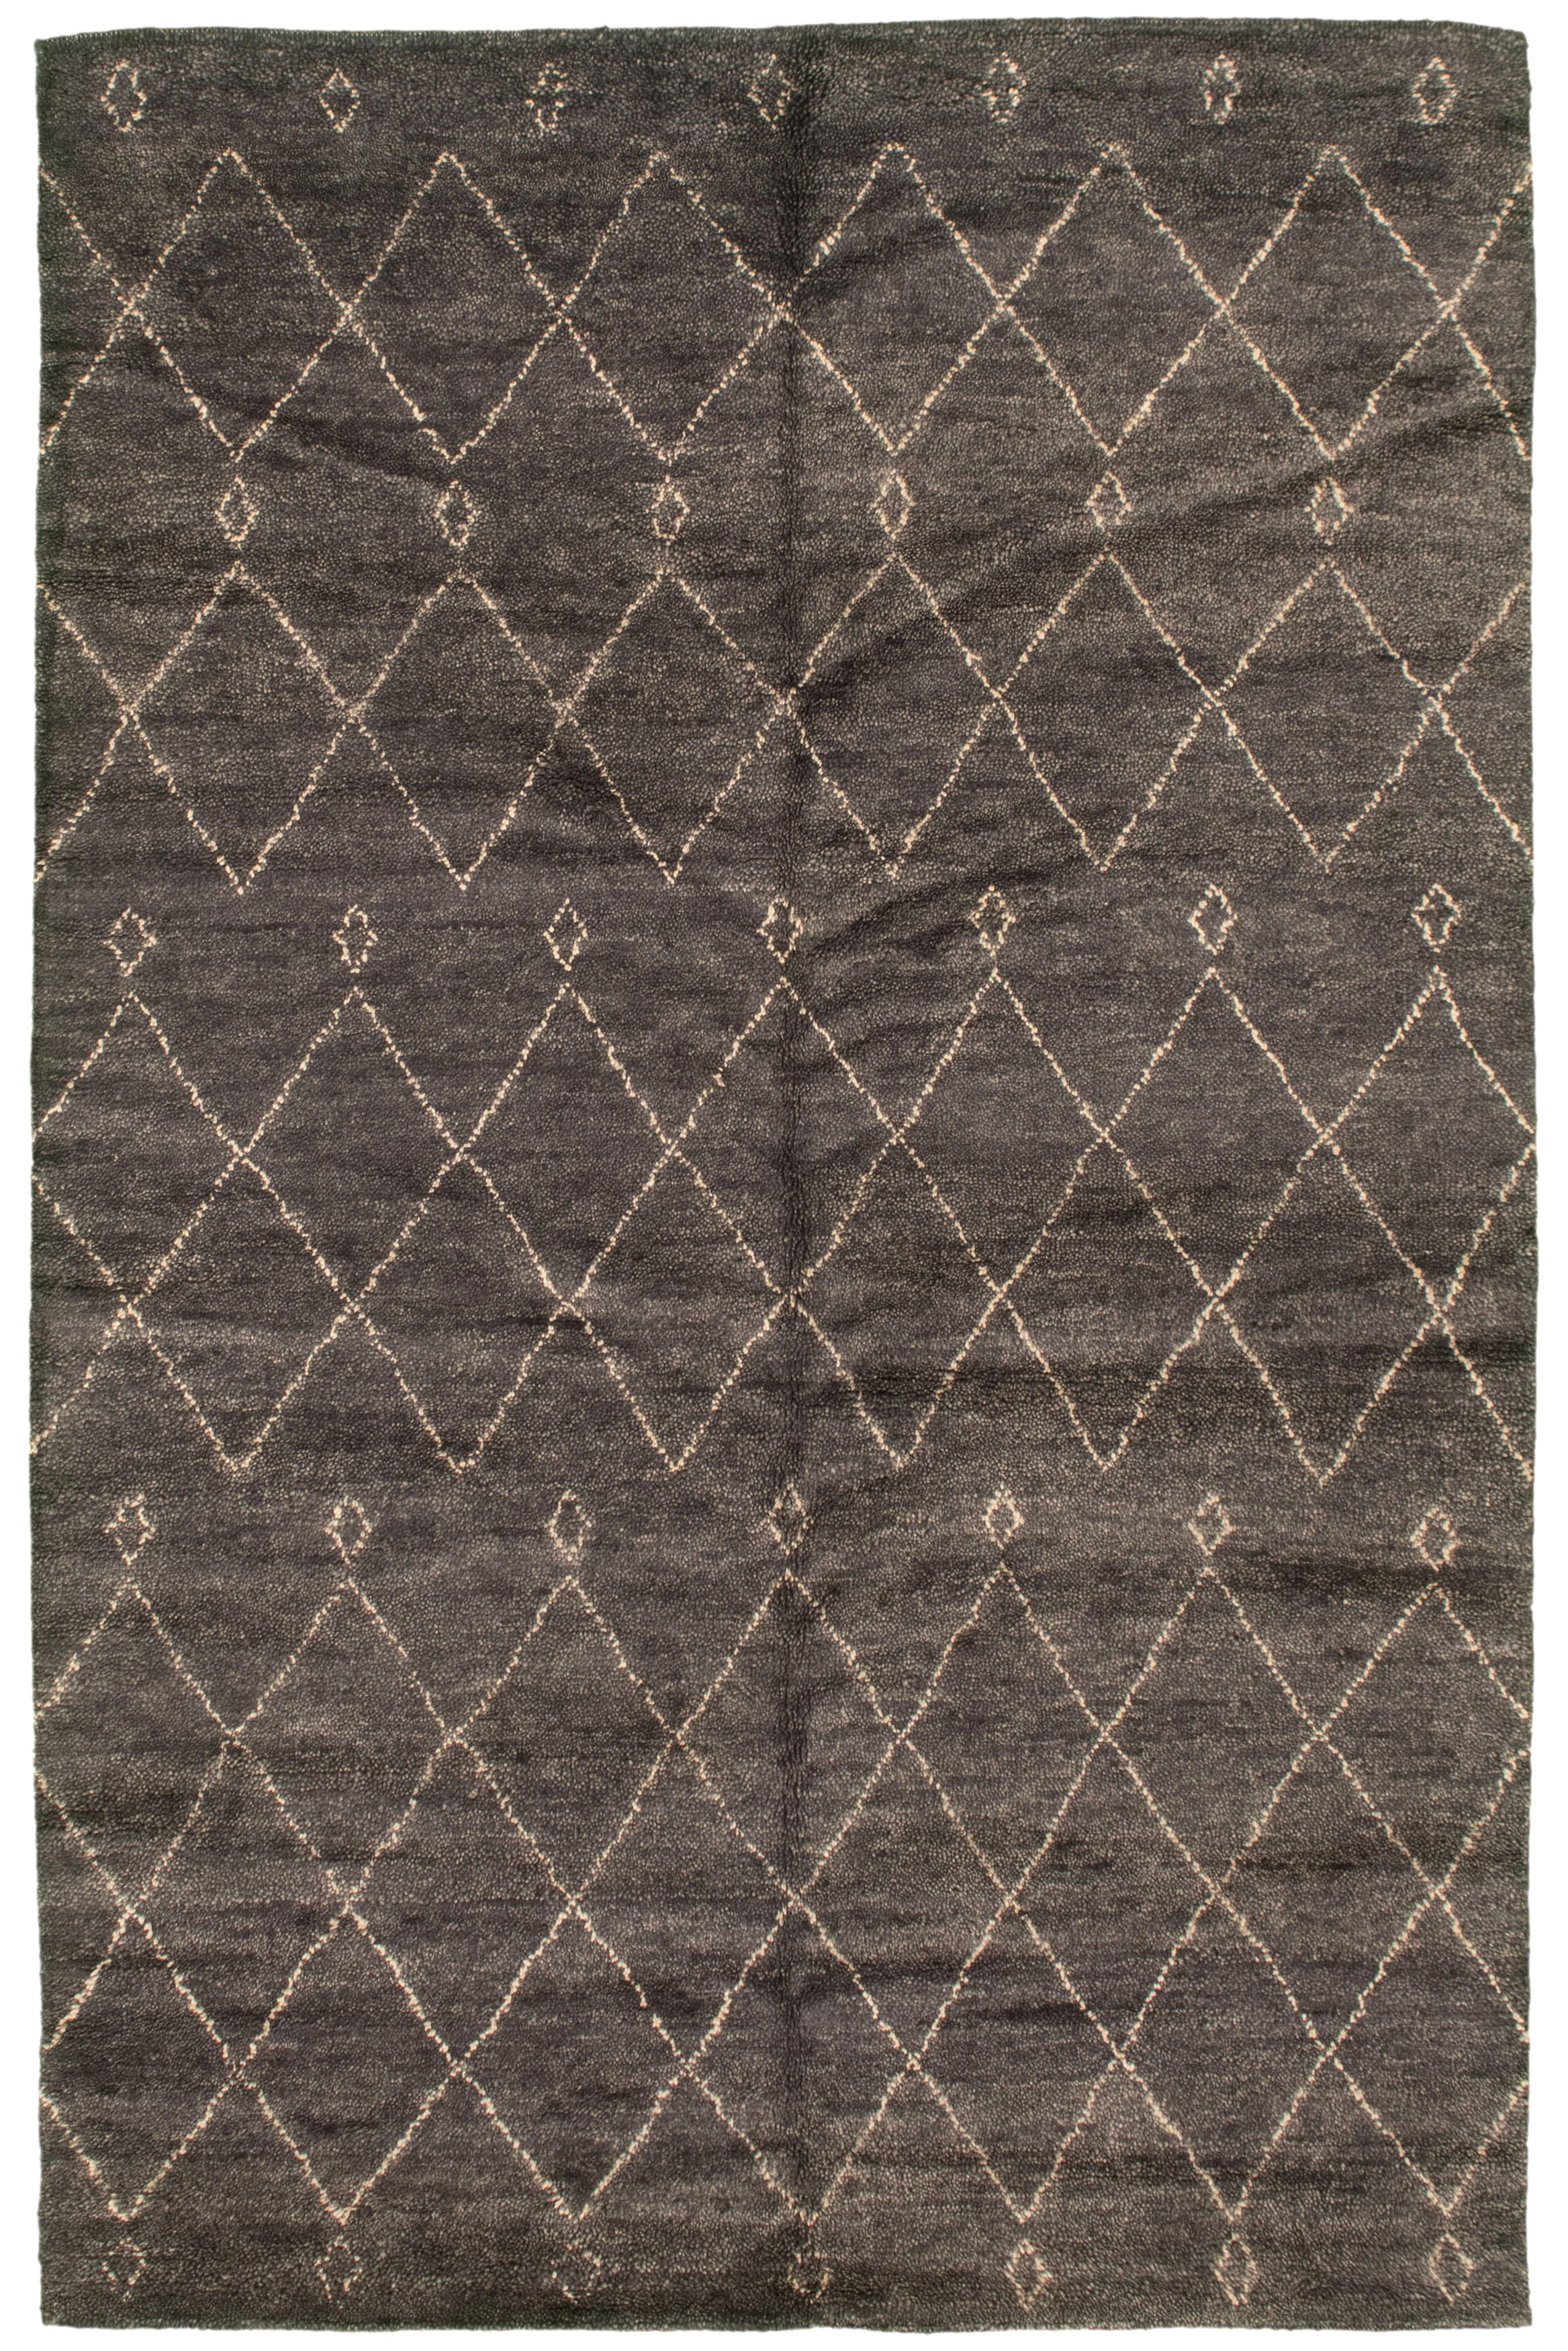 Hand-knotted Tangier Dark Grey Wool Rug 5'2" x 8'2" Size: 5'2" x 8'2"  